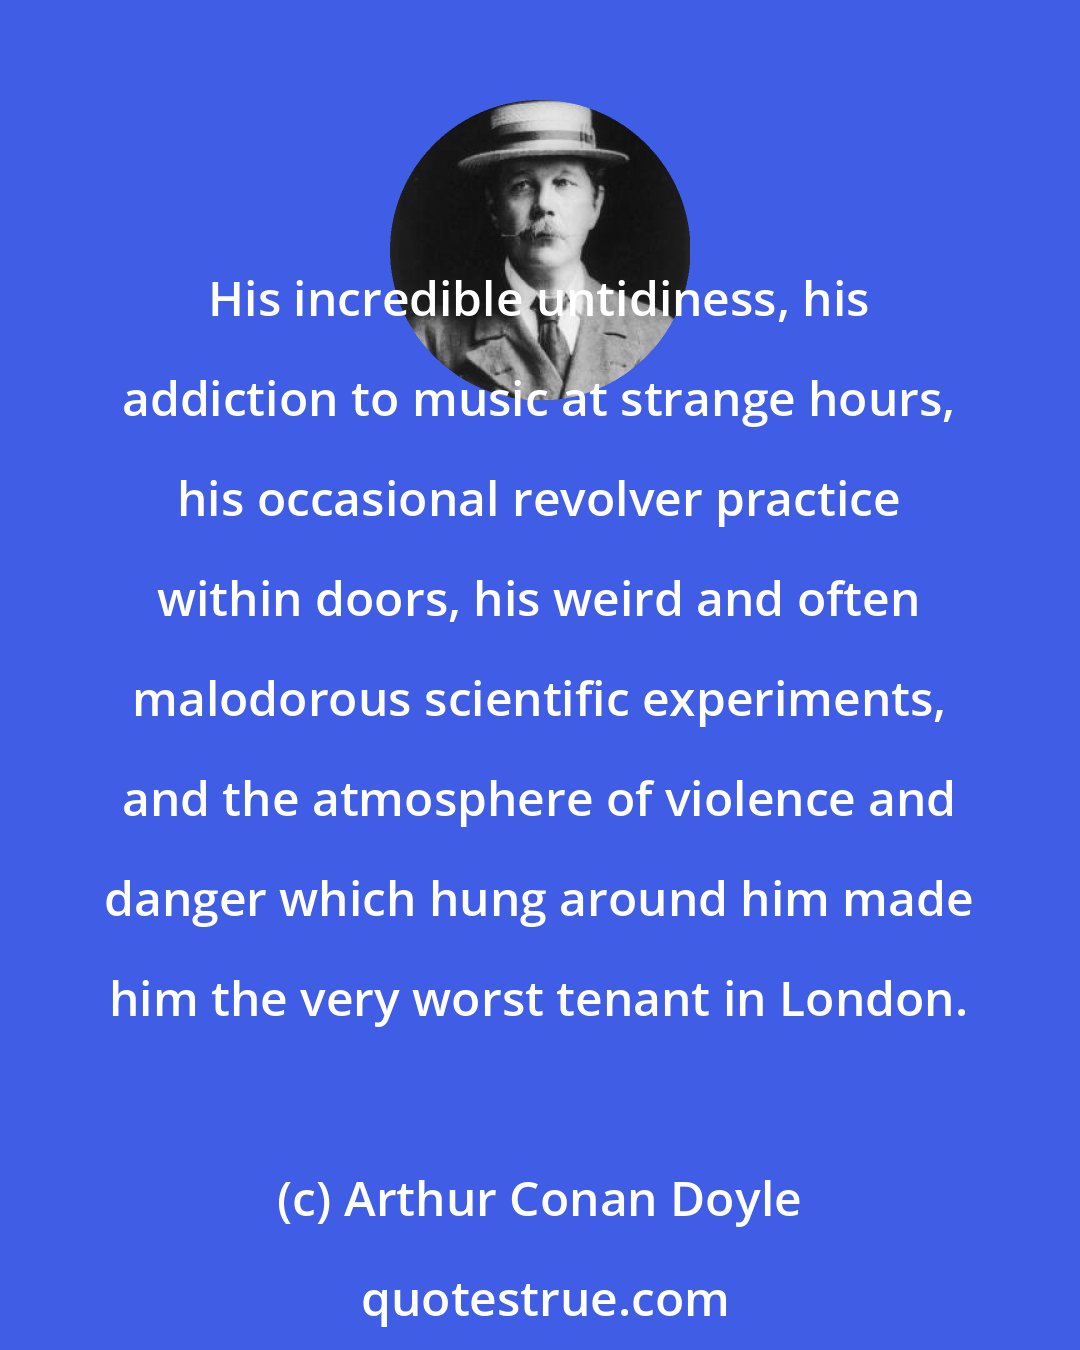 Arthur Conan Doyle: His incredible untidiness, his addiction to music at strange hours, his occasional revolver practice within doors, his weird and often malodorous scientific experiments, and the atmosphere of violence and danger which hung around him made him the very worst tenant in London.